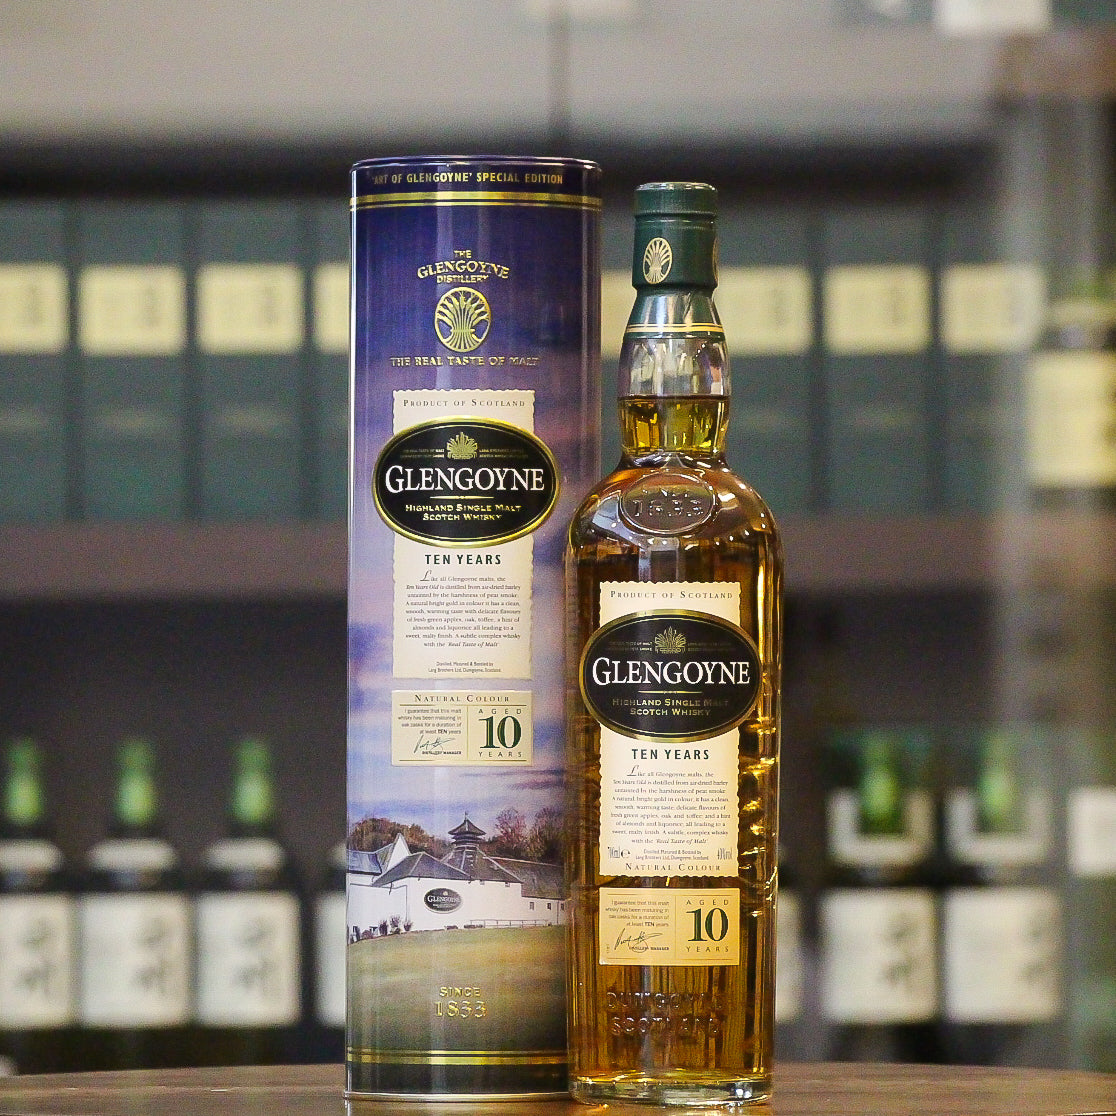 The first release in the "Art of Glengoyne" series carries a watercolor painting of the distillery with the snow capped peak of Dumgoyne hill by the Edinburgh based artist David Brogan.  Like all Glengoyne malts, this 10 year old is distilled from air-dried barley without any peat smoke. With a natural bright gold color and a smooth warming palate, this will remind you of green apples, oak and toffee with a hint of almonds and liquorice. A sweet malty finish. (Tasting Notes from Distillery)